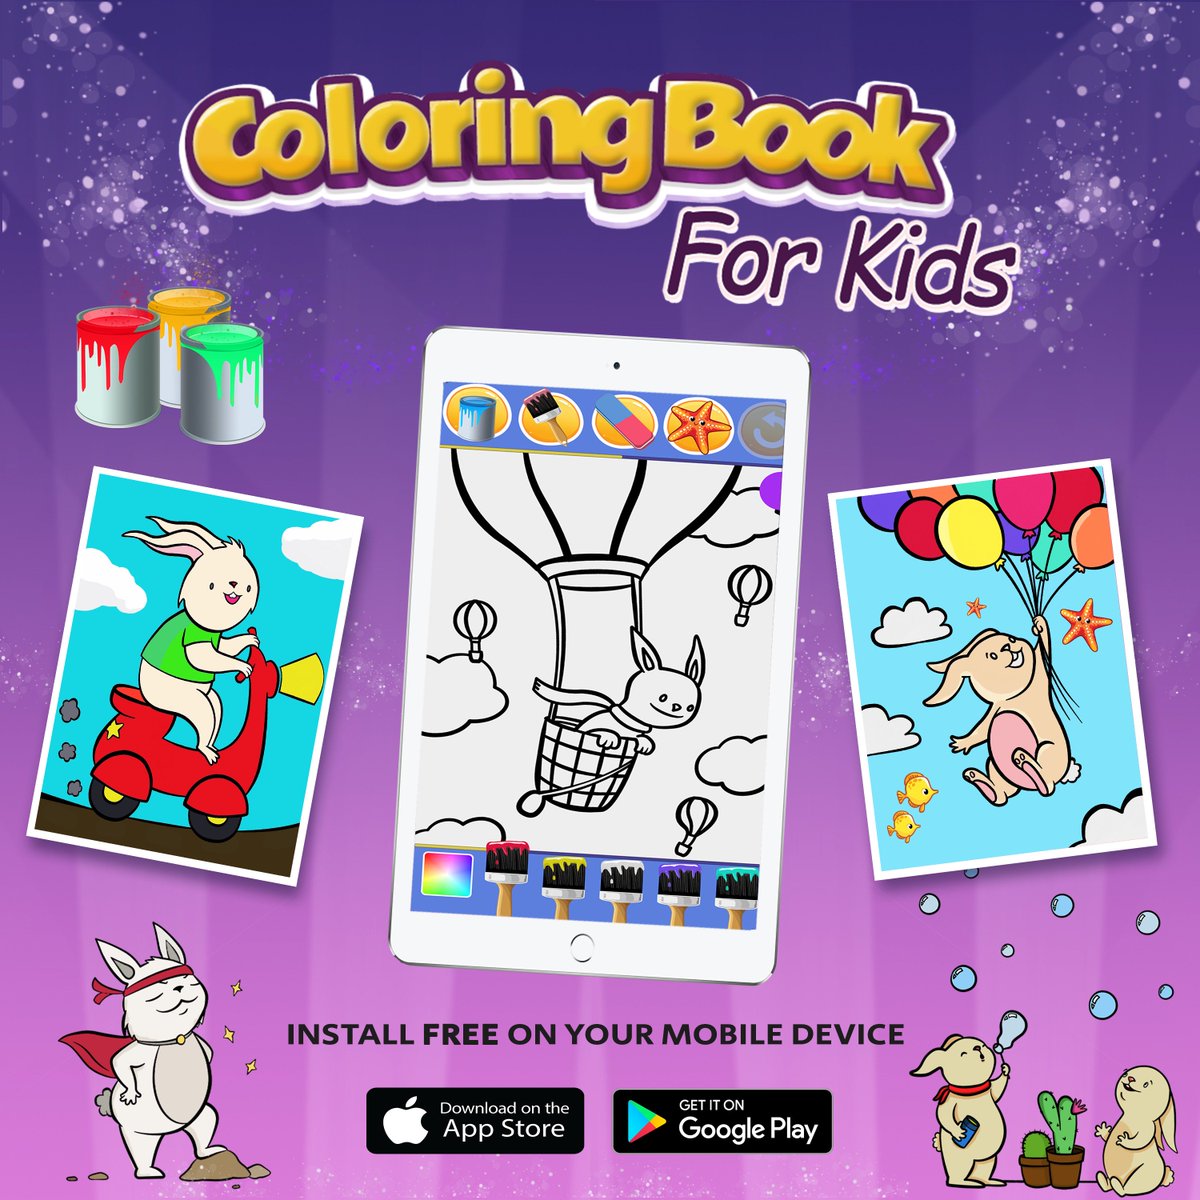 Follow us on instagram :) 
instagram.com/baboo.games/ 

iOS : goo.gl/CyqDSn
Android : goo.gl/a687LU

#BabooGames #ColoringBookforKids
#indiegames #gamedev #indiedev #mobilegame #videogames #madewithunity #mobile #gaming #solodev #ColoringBook

Happy coloring!